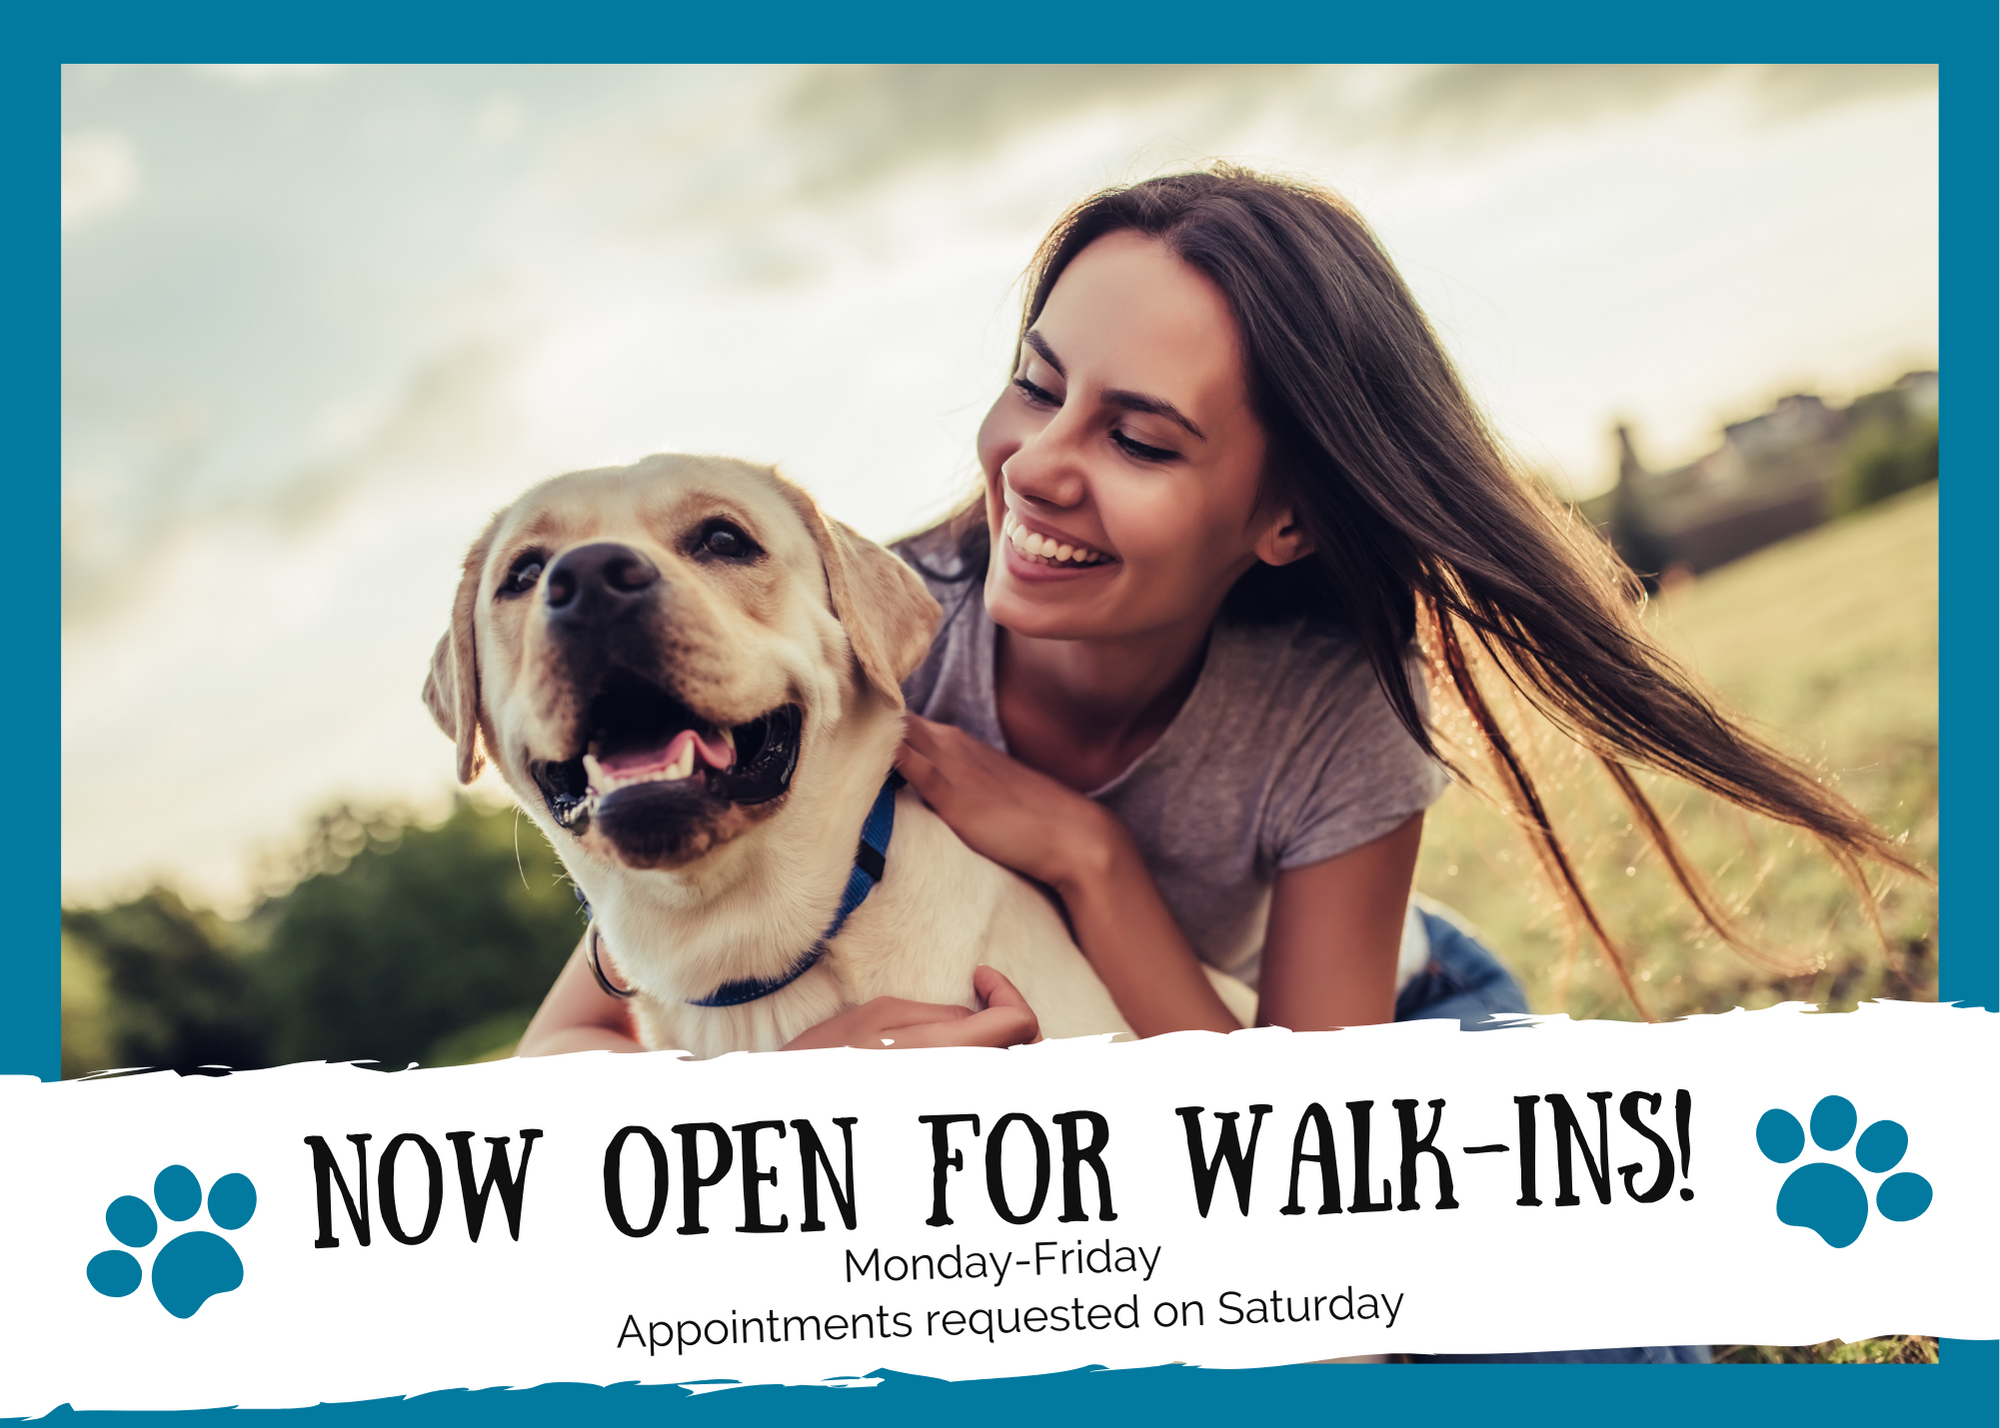 We Are Open for Walk-Ins!